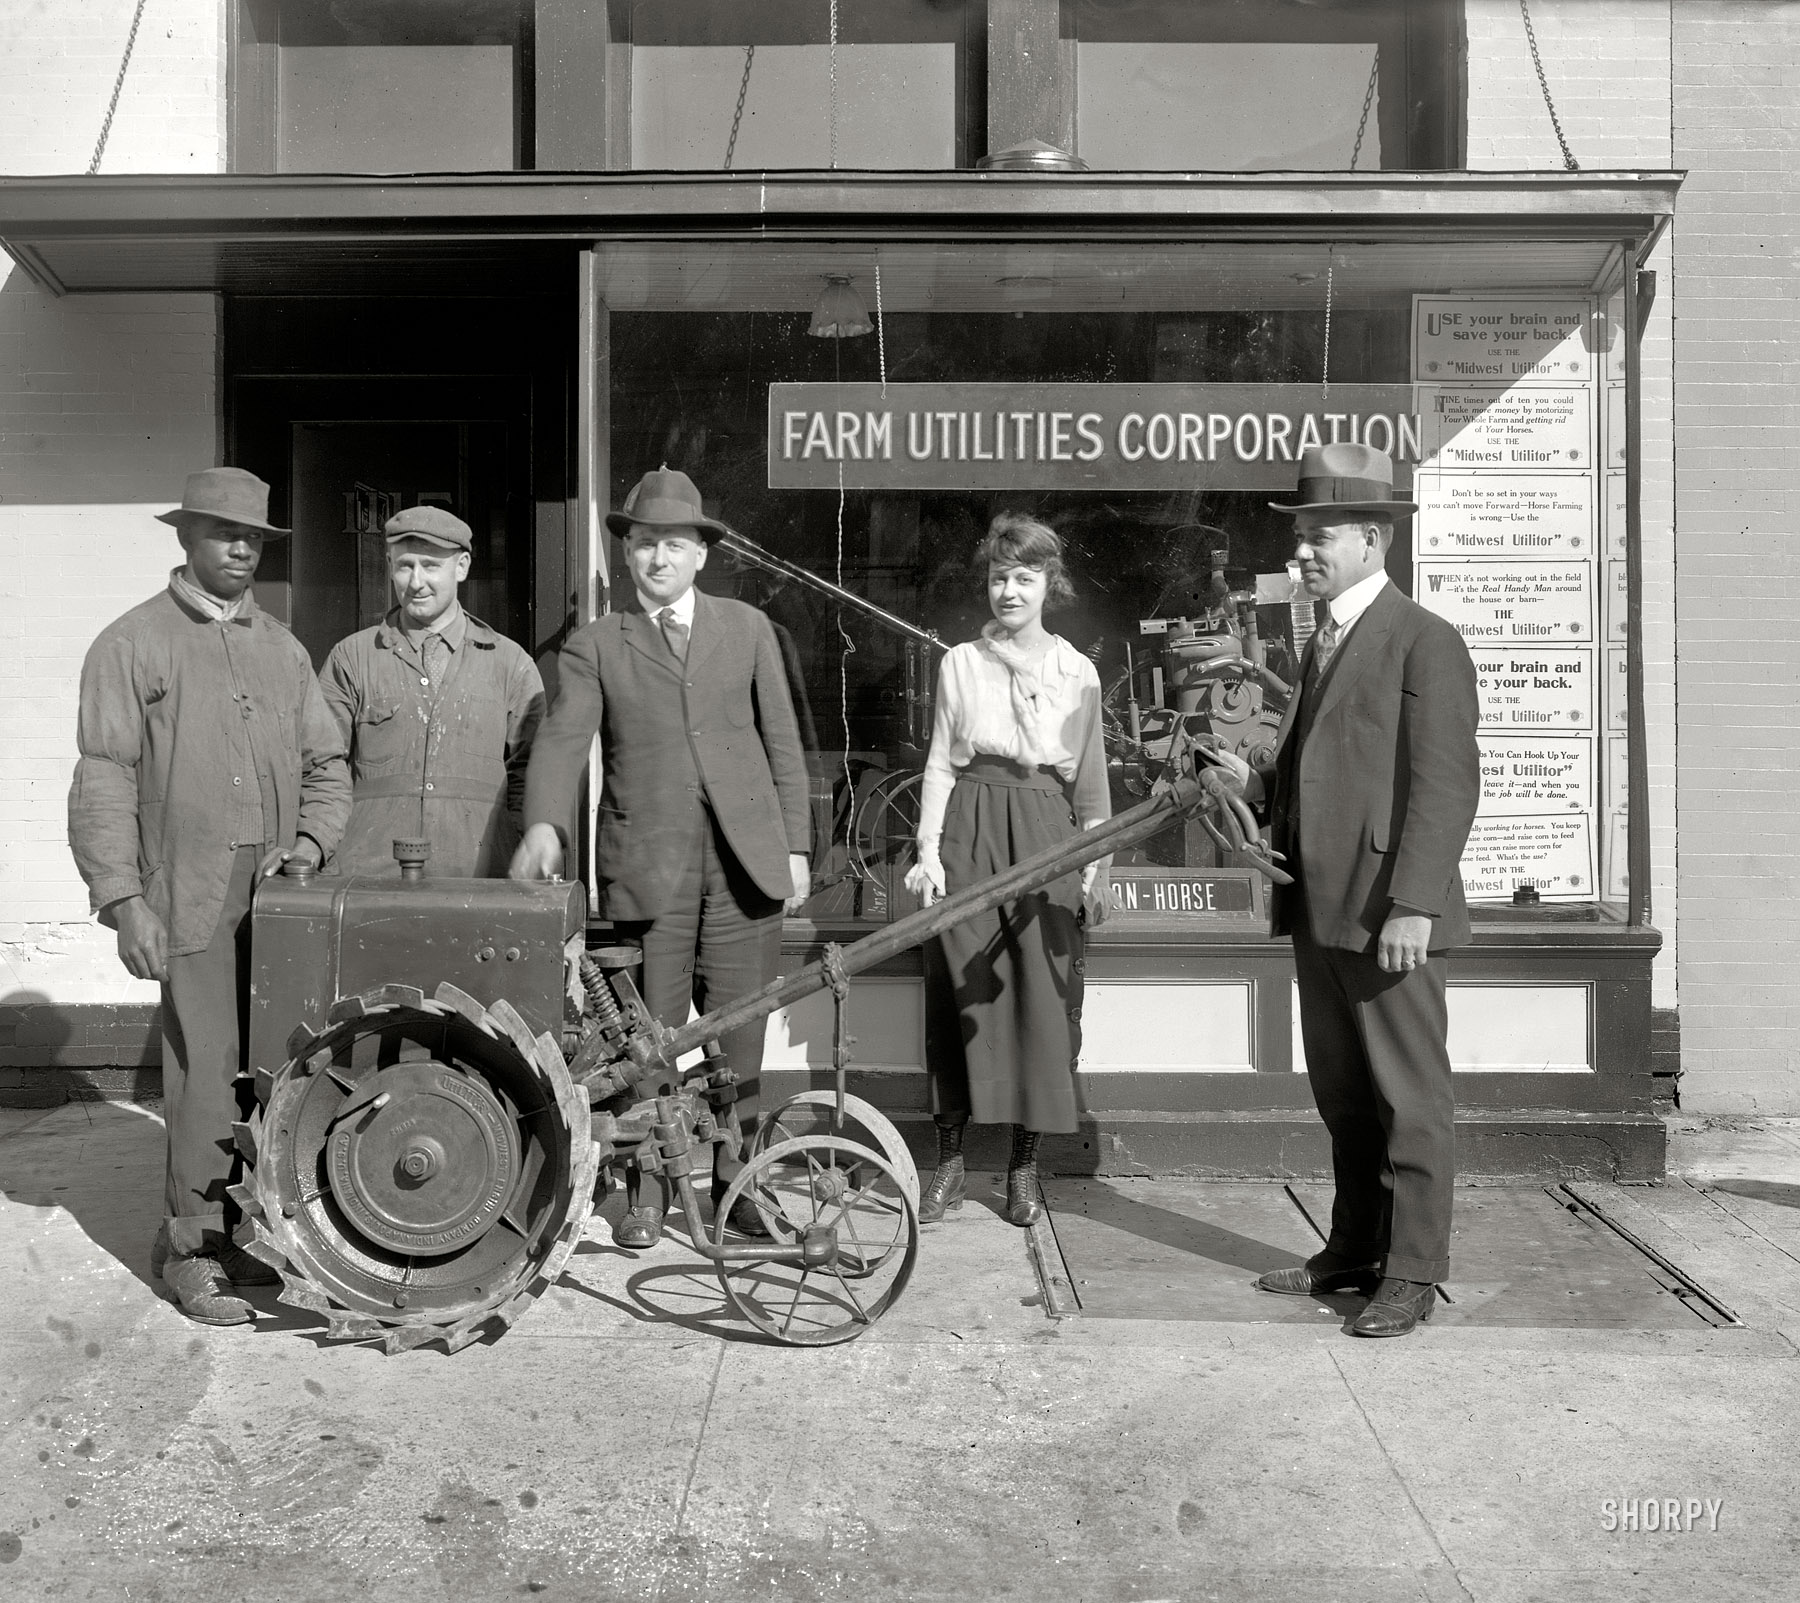 Washington, D.C., circa 1920. "Farm Utilities Corp. (exterior), 14th Street N.W." The two three draws here, for me at least, are the amused expressions of all concerned, and the name of this particular piece of equipment: "Midwest Utilitor." Oh, and the entertaining signage in the window. National Photo. View full size.